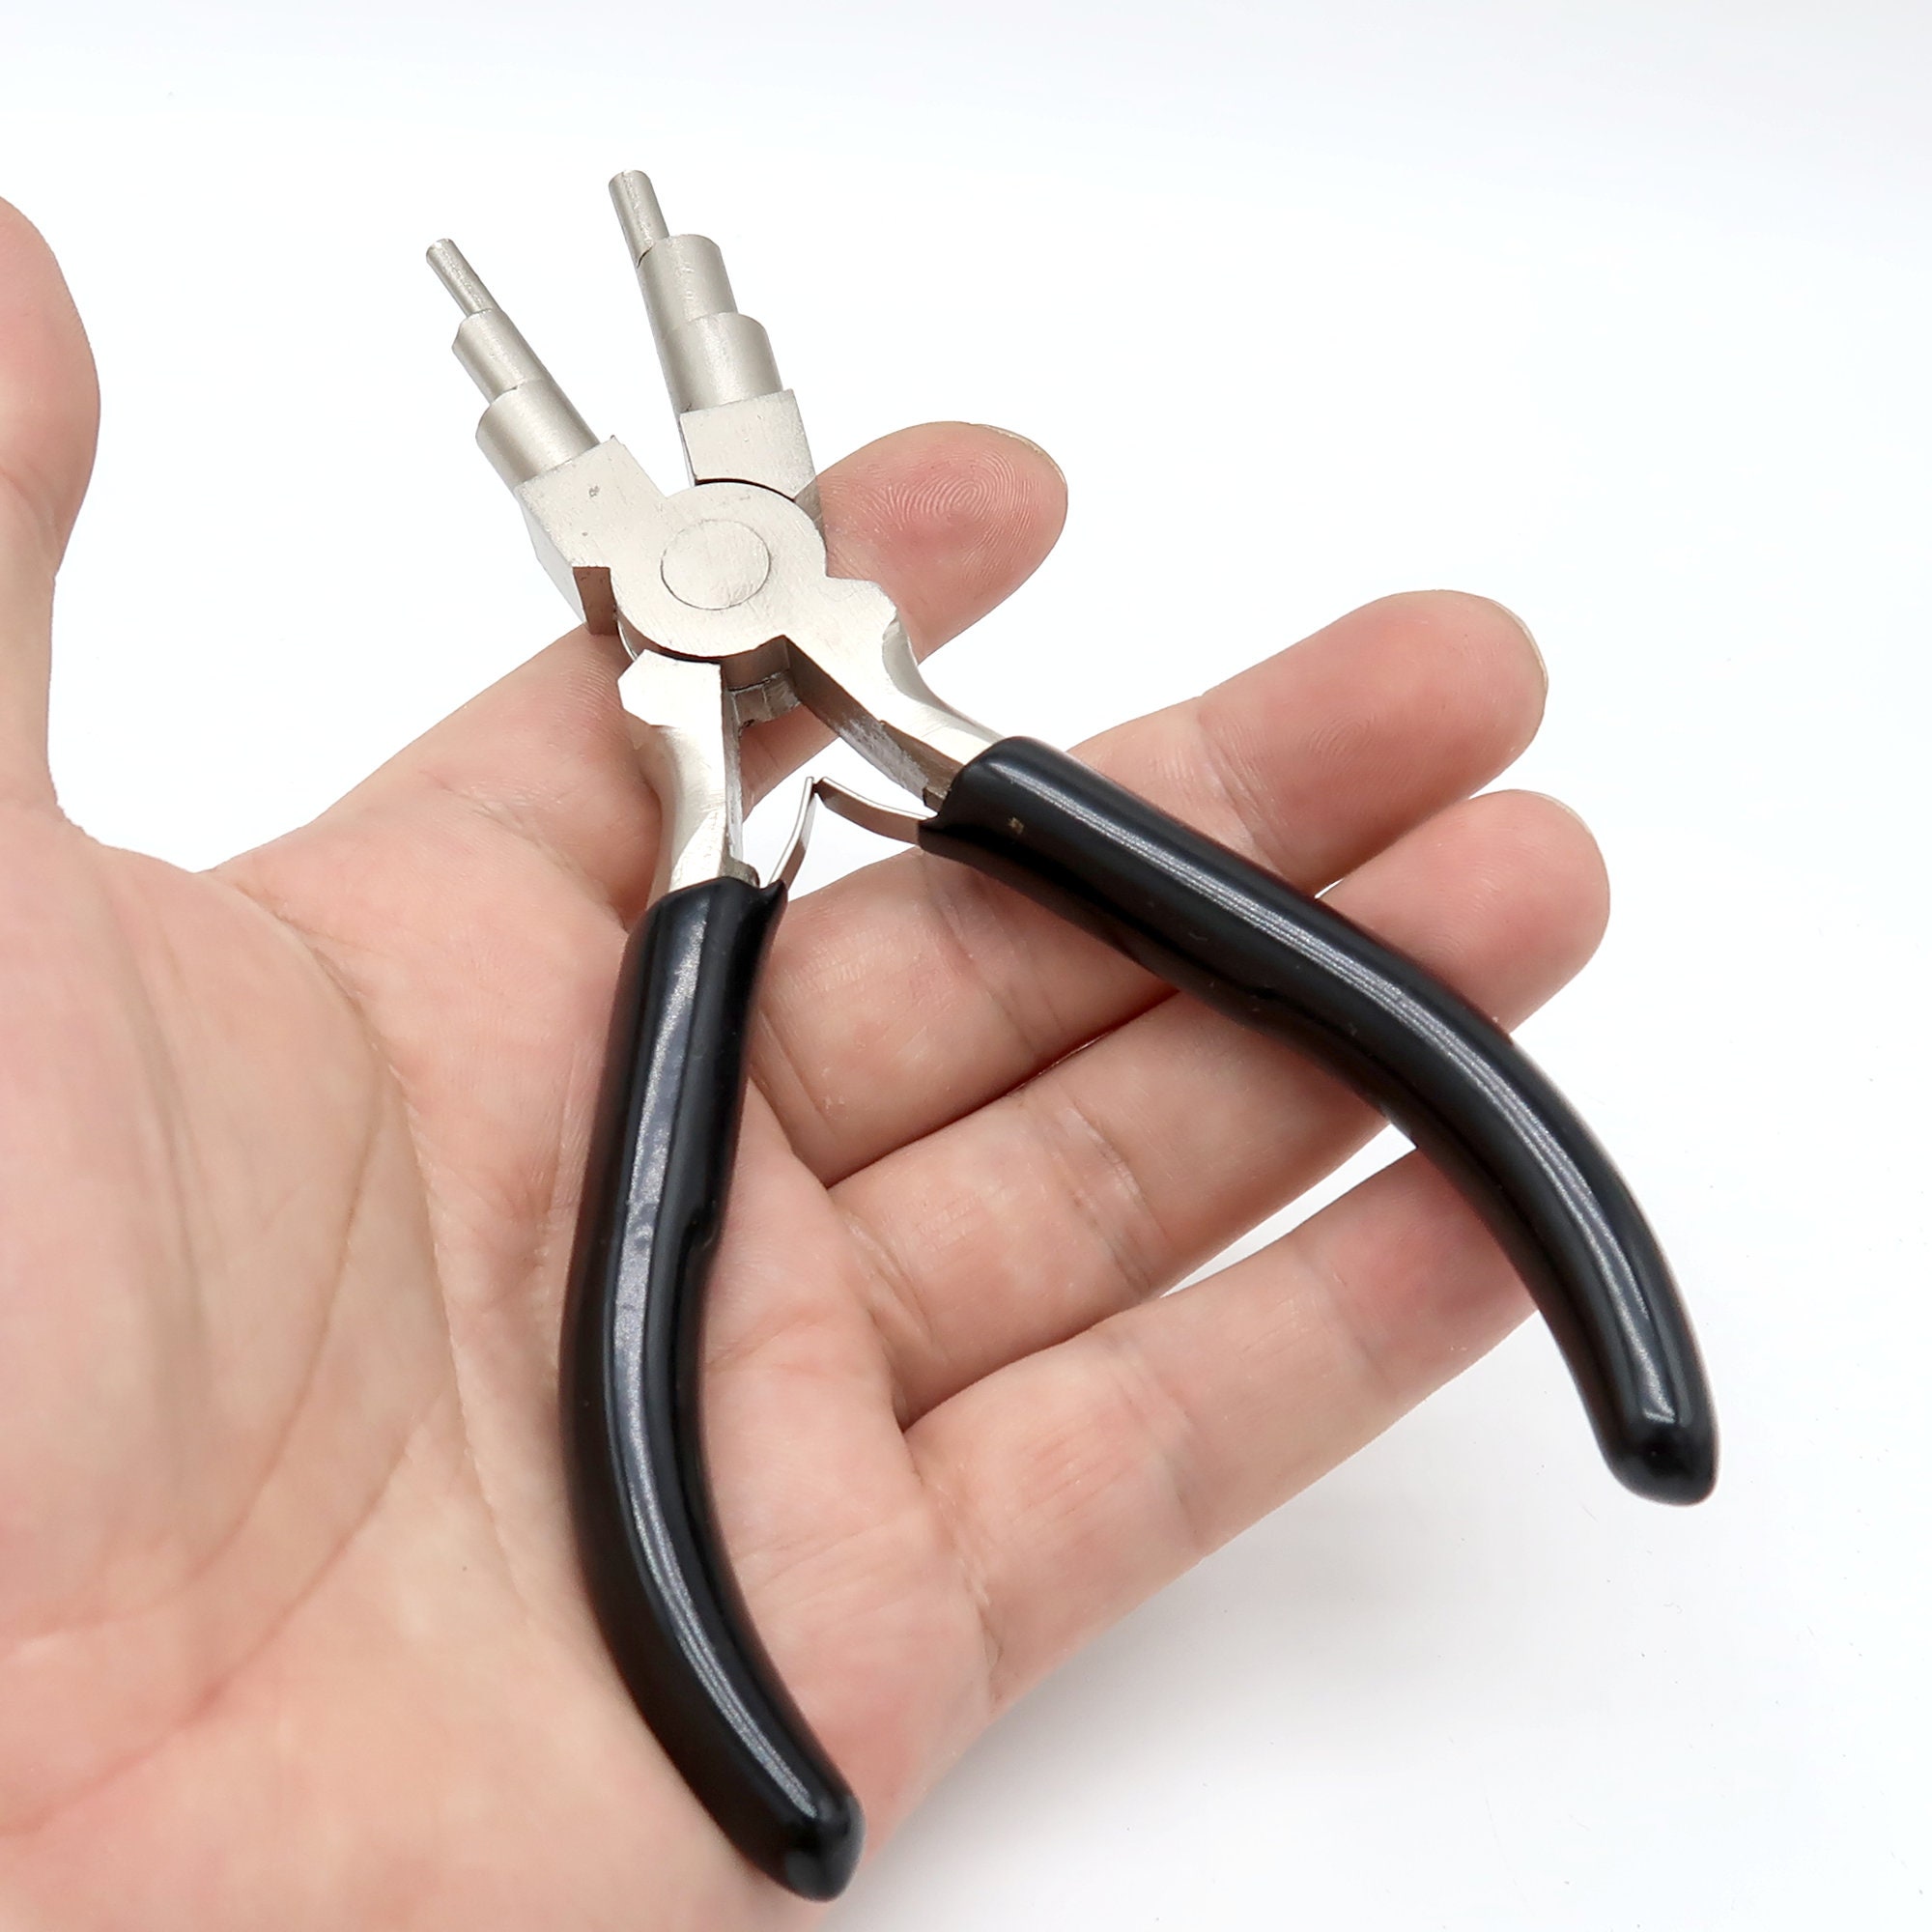 Bail Making Pliers Portable with Non Slip Grip Handle 6 Step Wire Wrapping  Tools for Jewelry Making